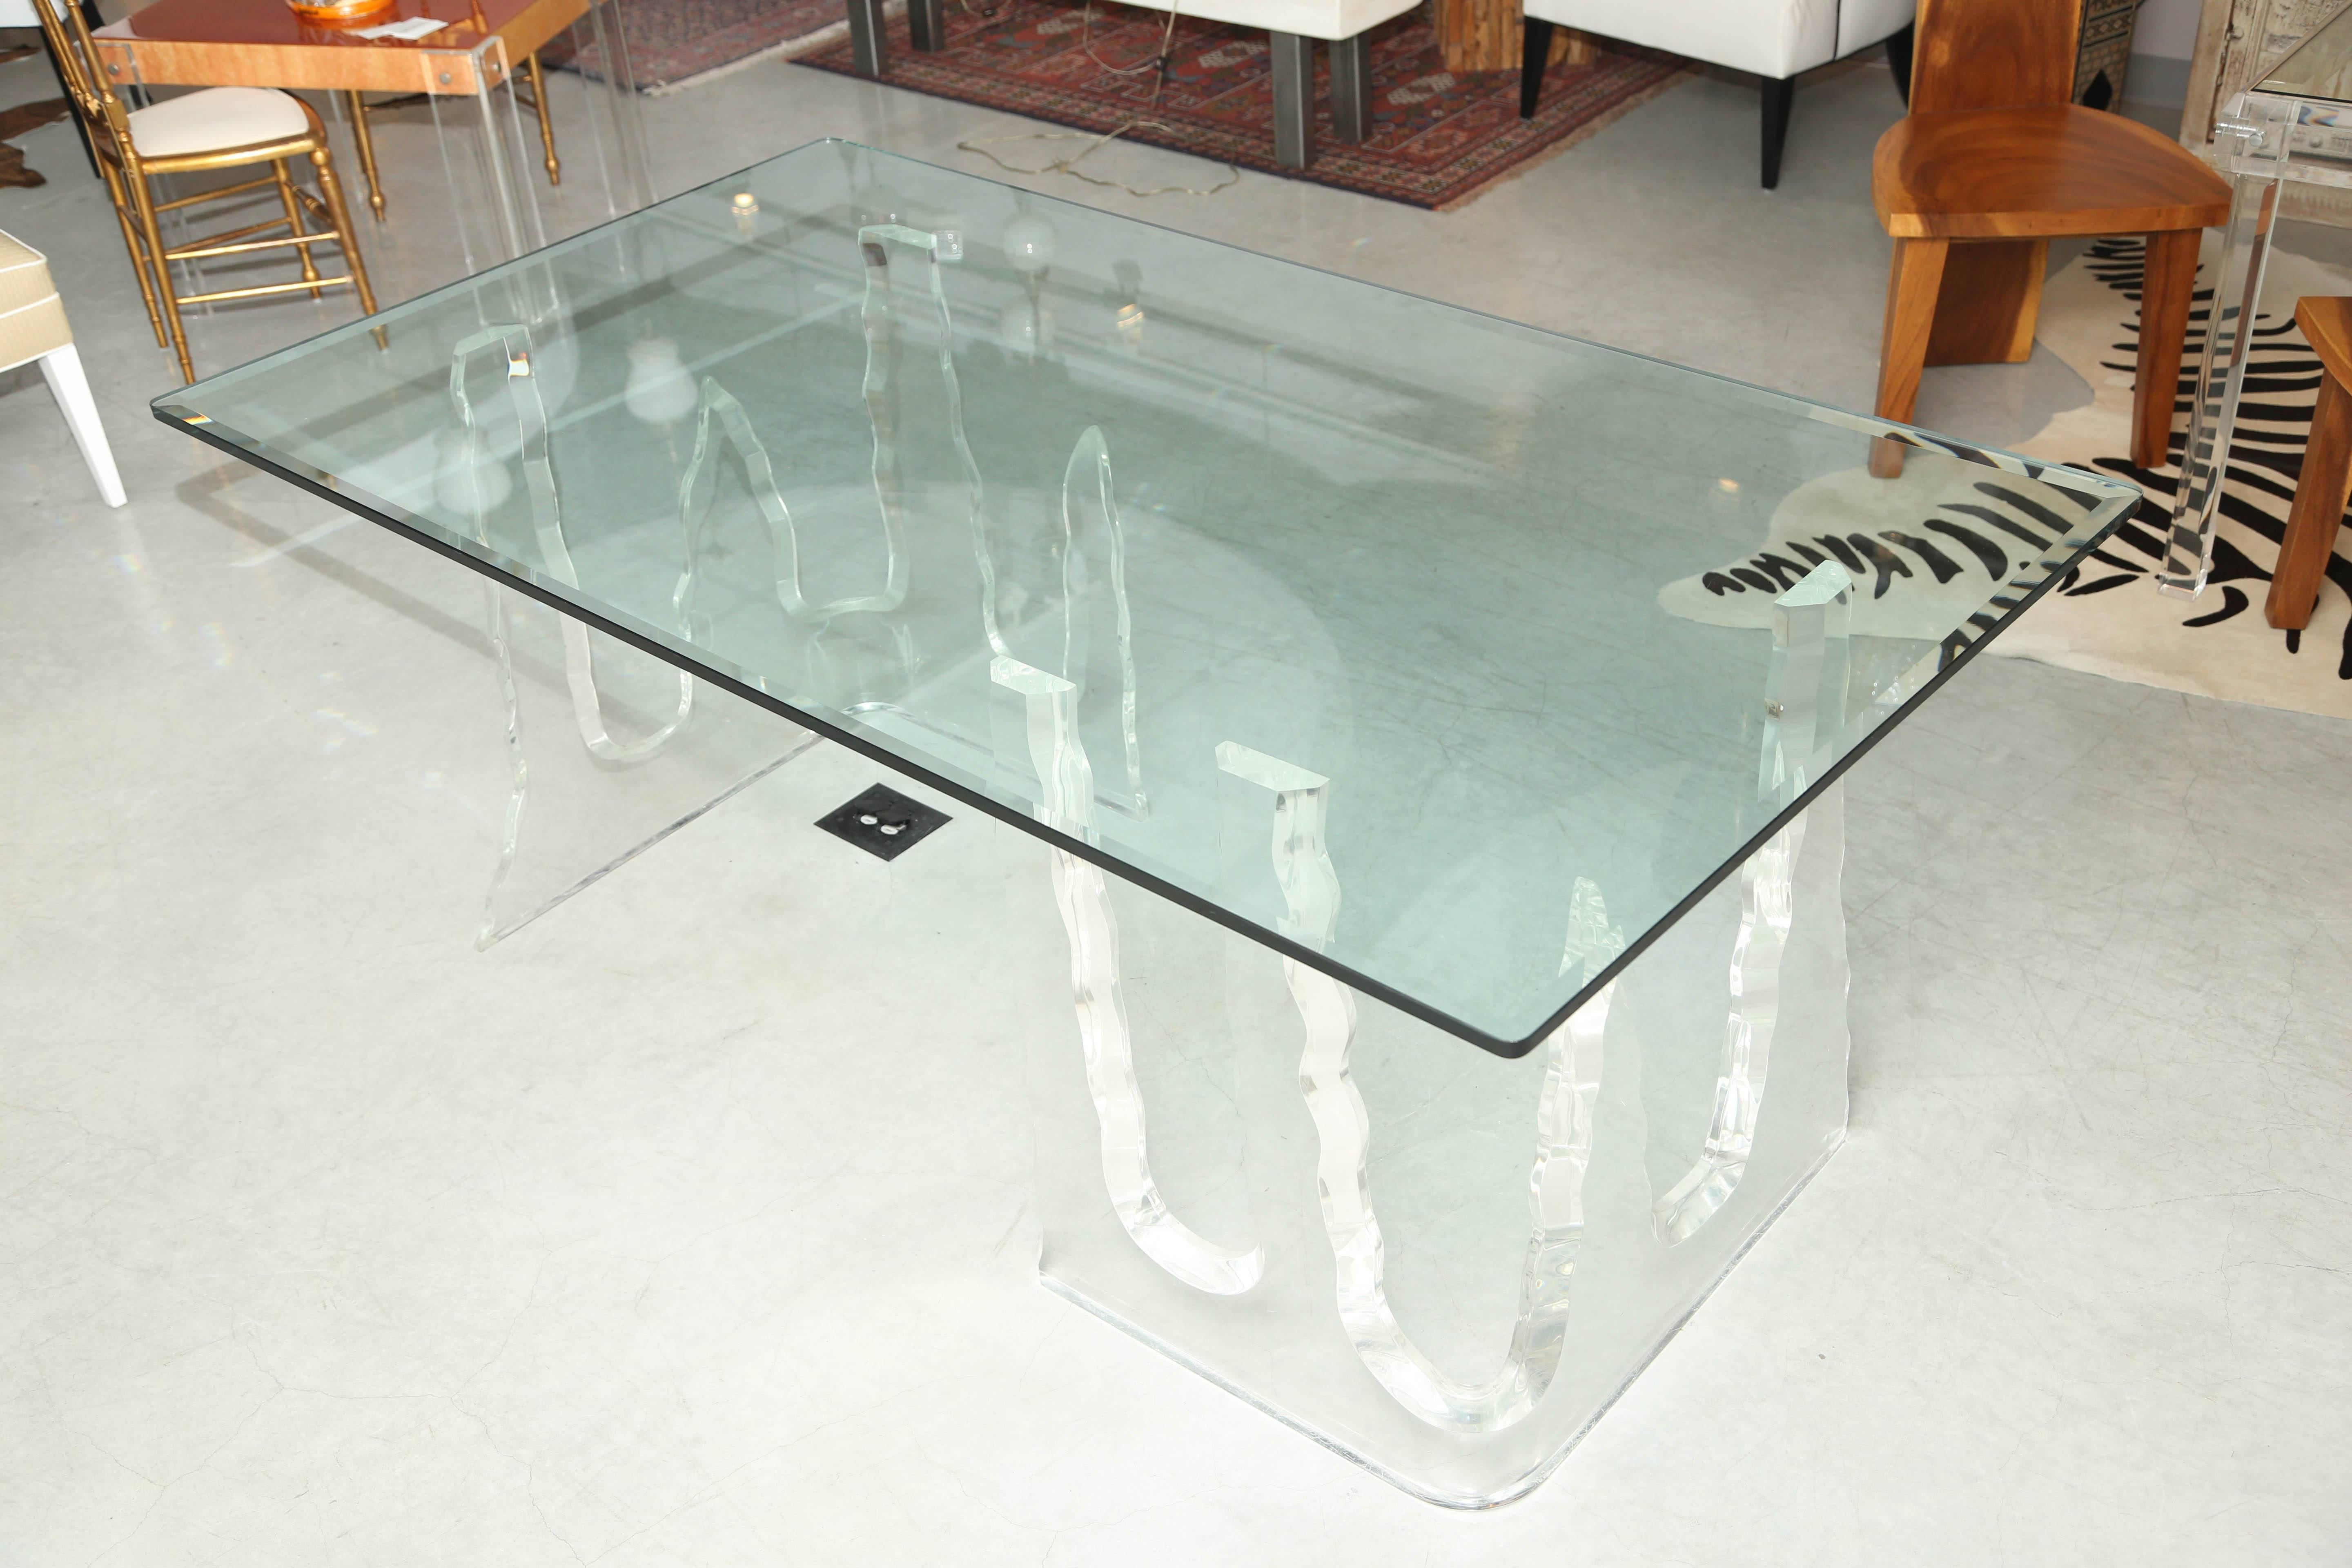 The glass top is optional, the bases can support a larger top, top is for display purposes.
It is on a cement floor, so it is shown with no contrast.
On a dark floor would show the drama of this massive table.
Each pedestal measures 22" x 27